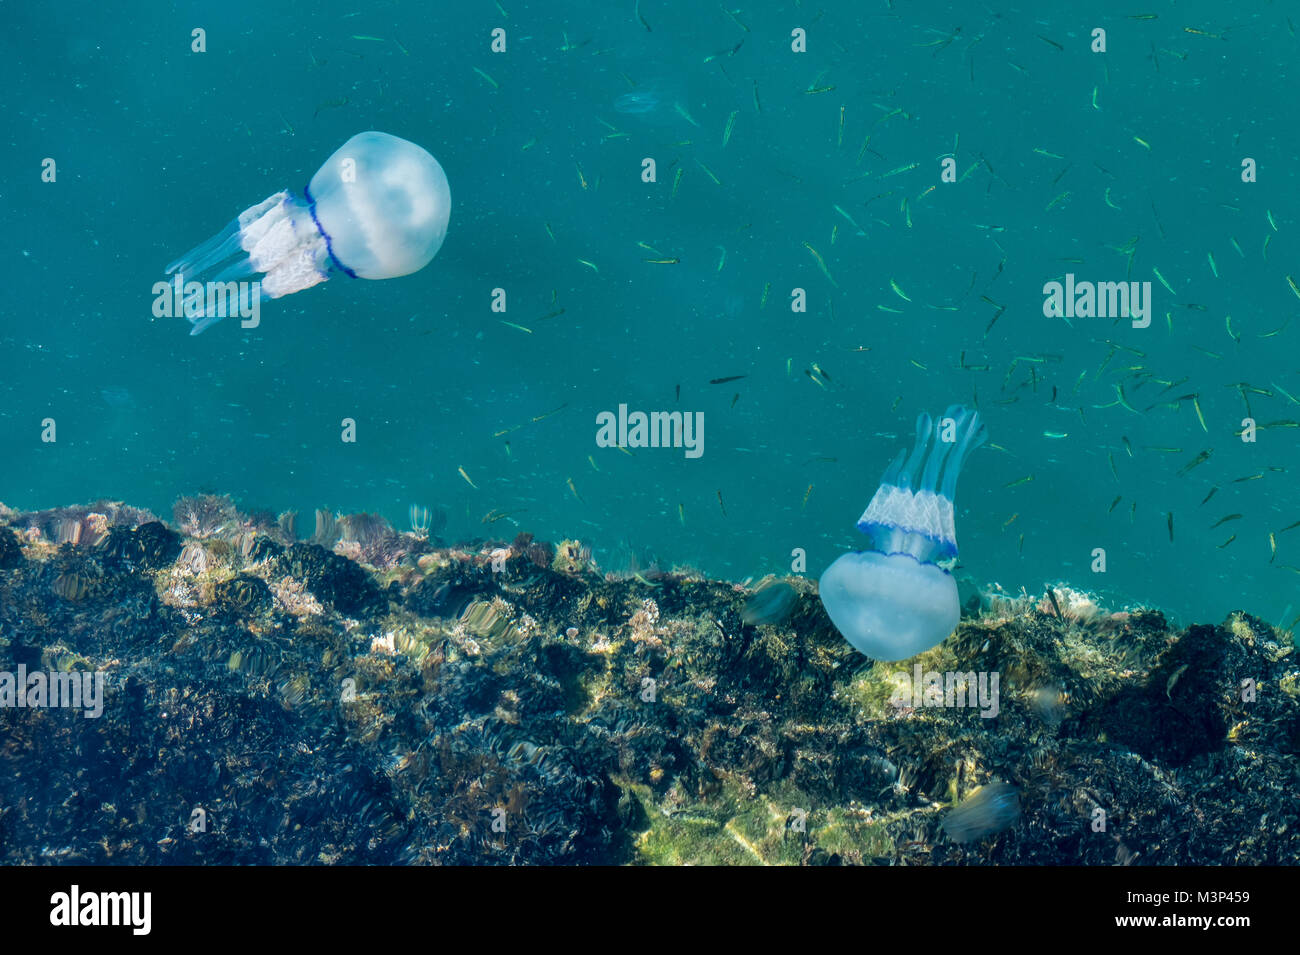 Beautiful glowing blue jellyfish in blue water sea with little fish background Stock Photo